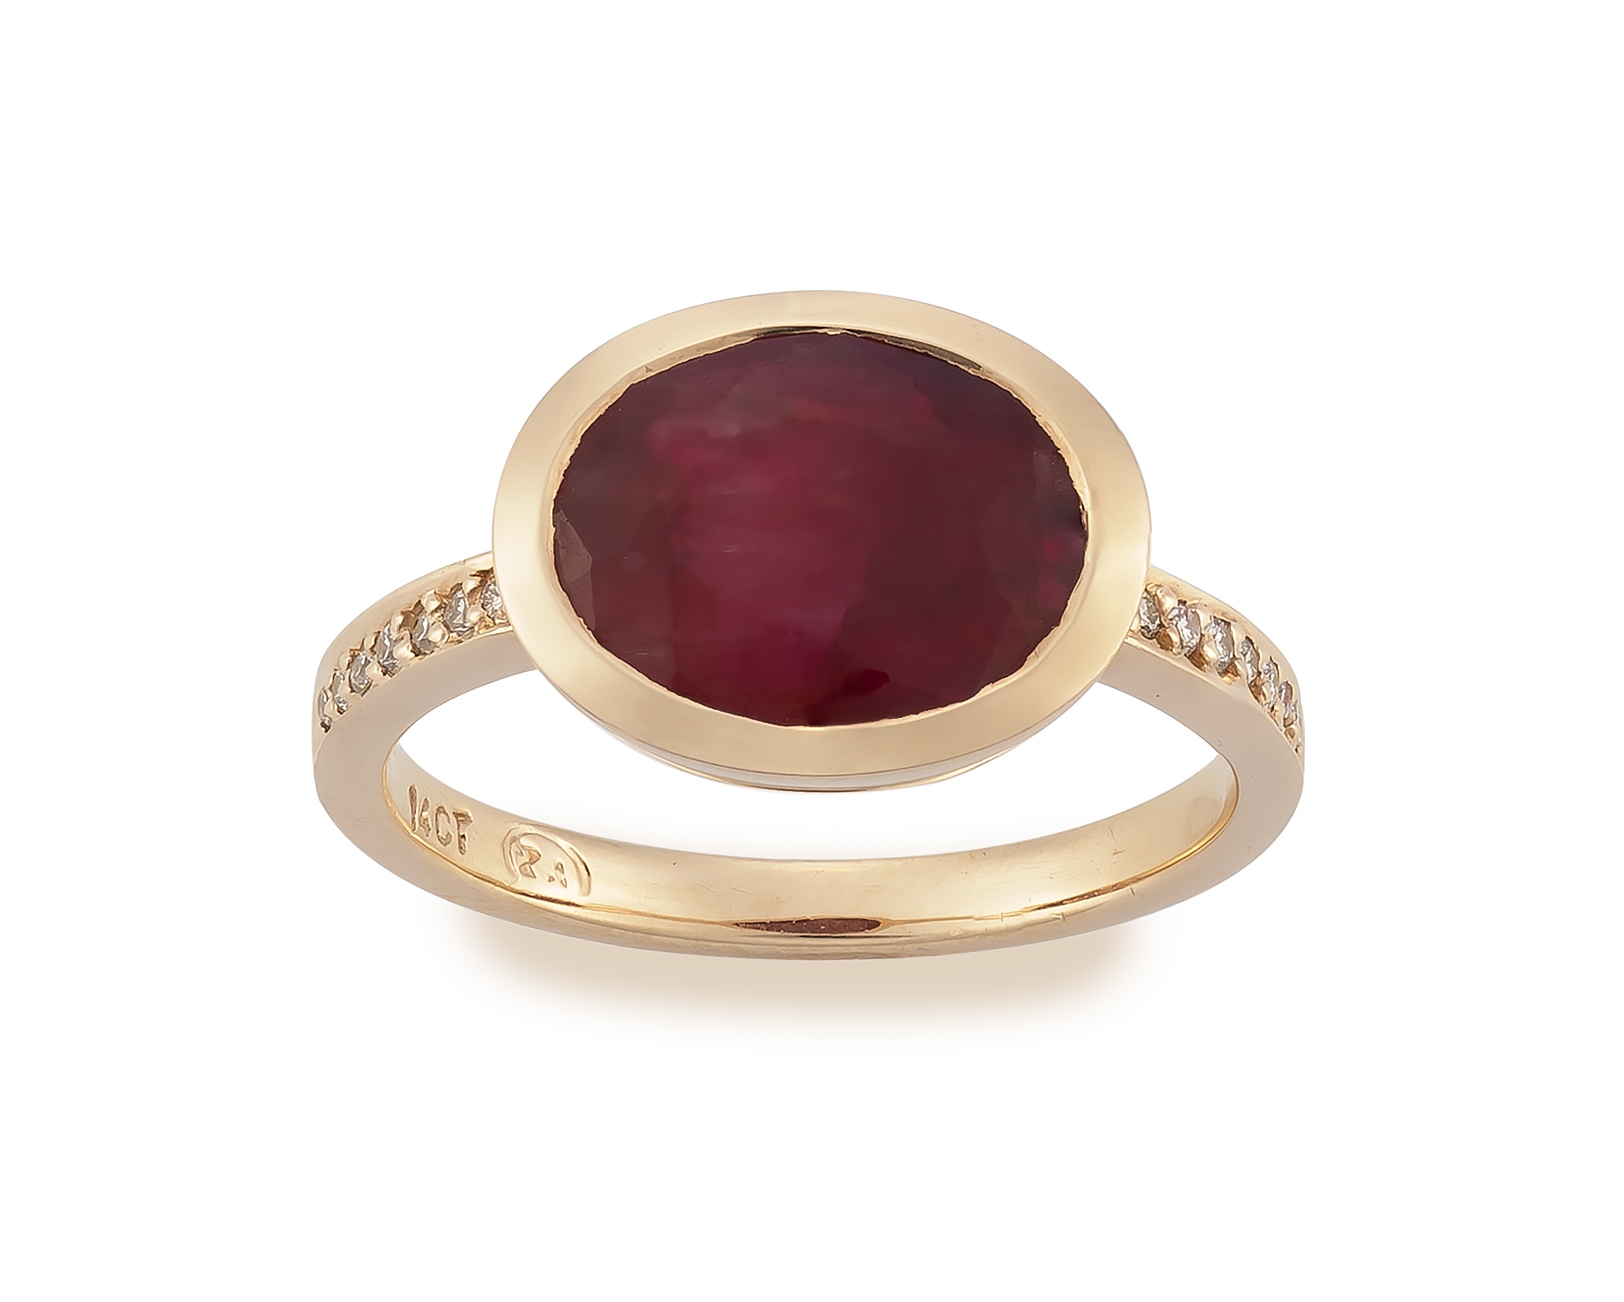 Ruby and diamond ring, designed by Taz Watson